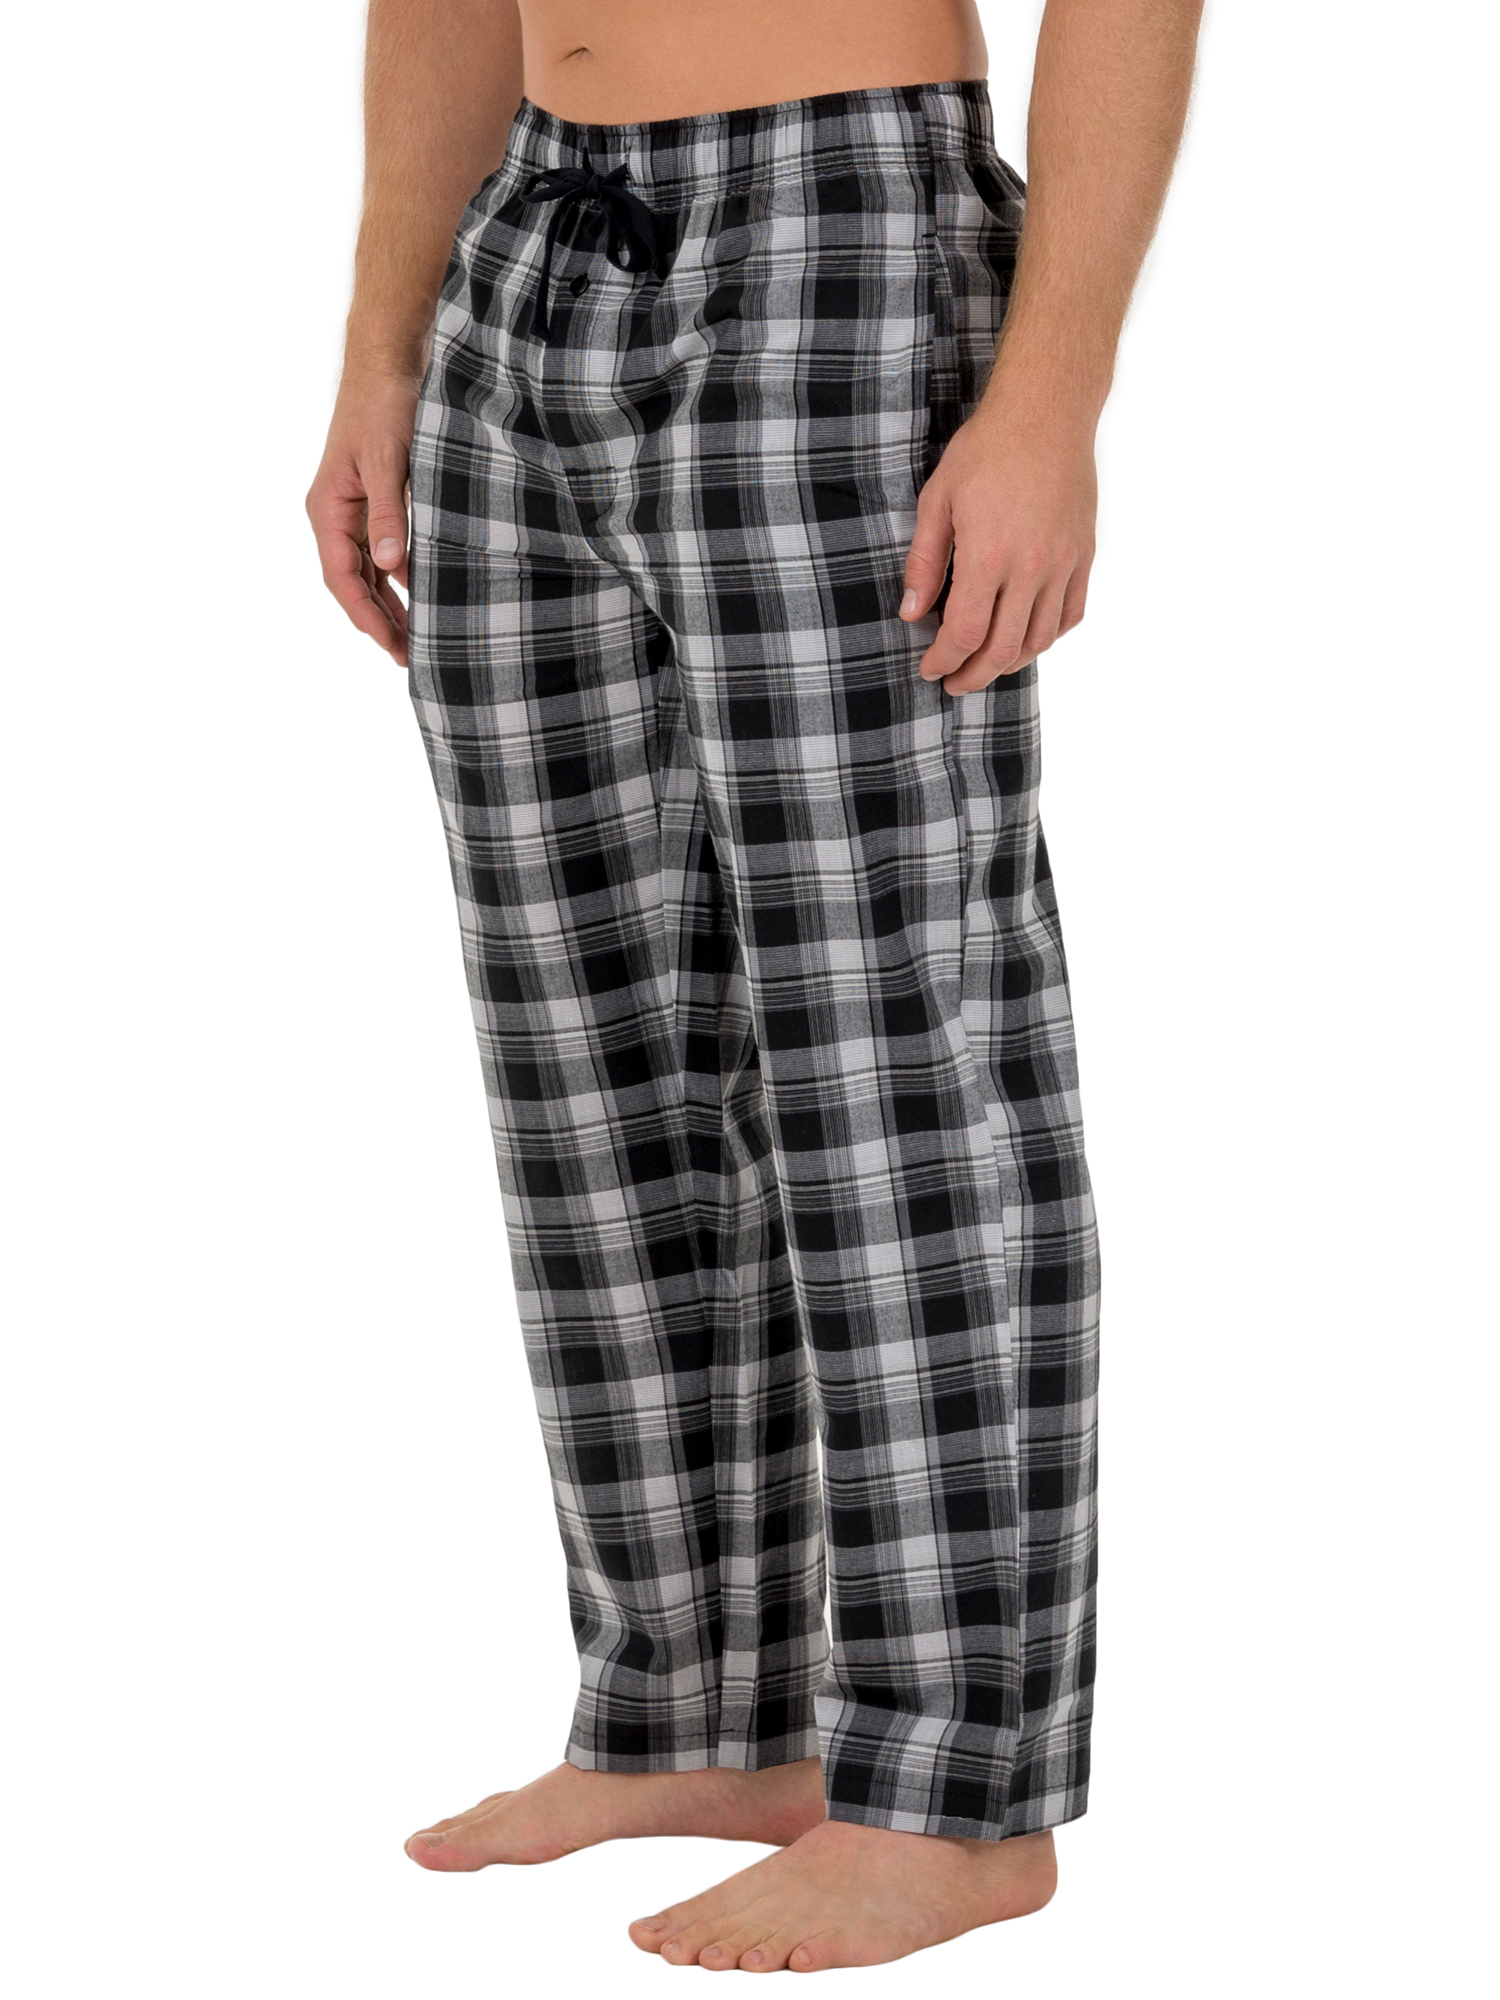 Fruit of the Loom Men's and Big Men's Microsanded Woven Plaid Pajama Pants, Sizes S-6XL & LT-3XLT - image 4 of 6